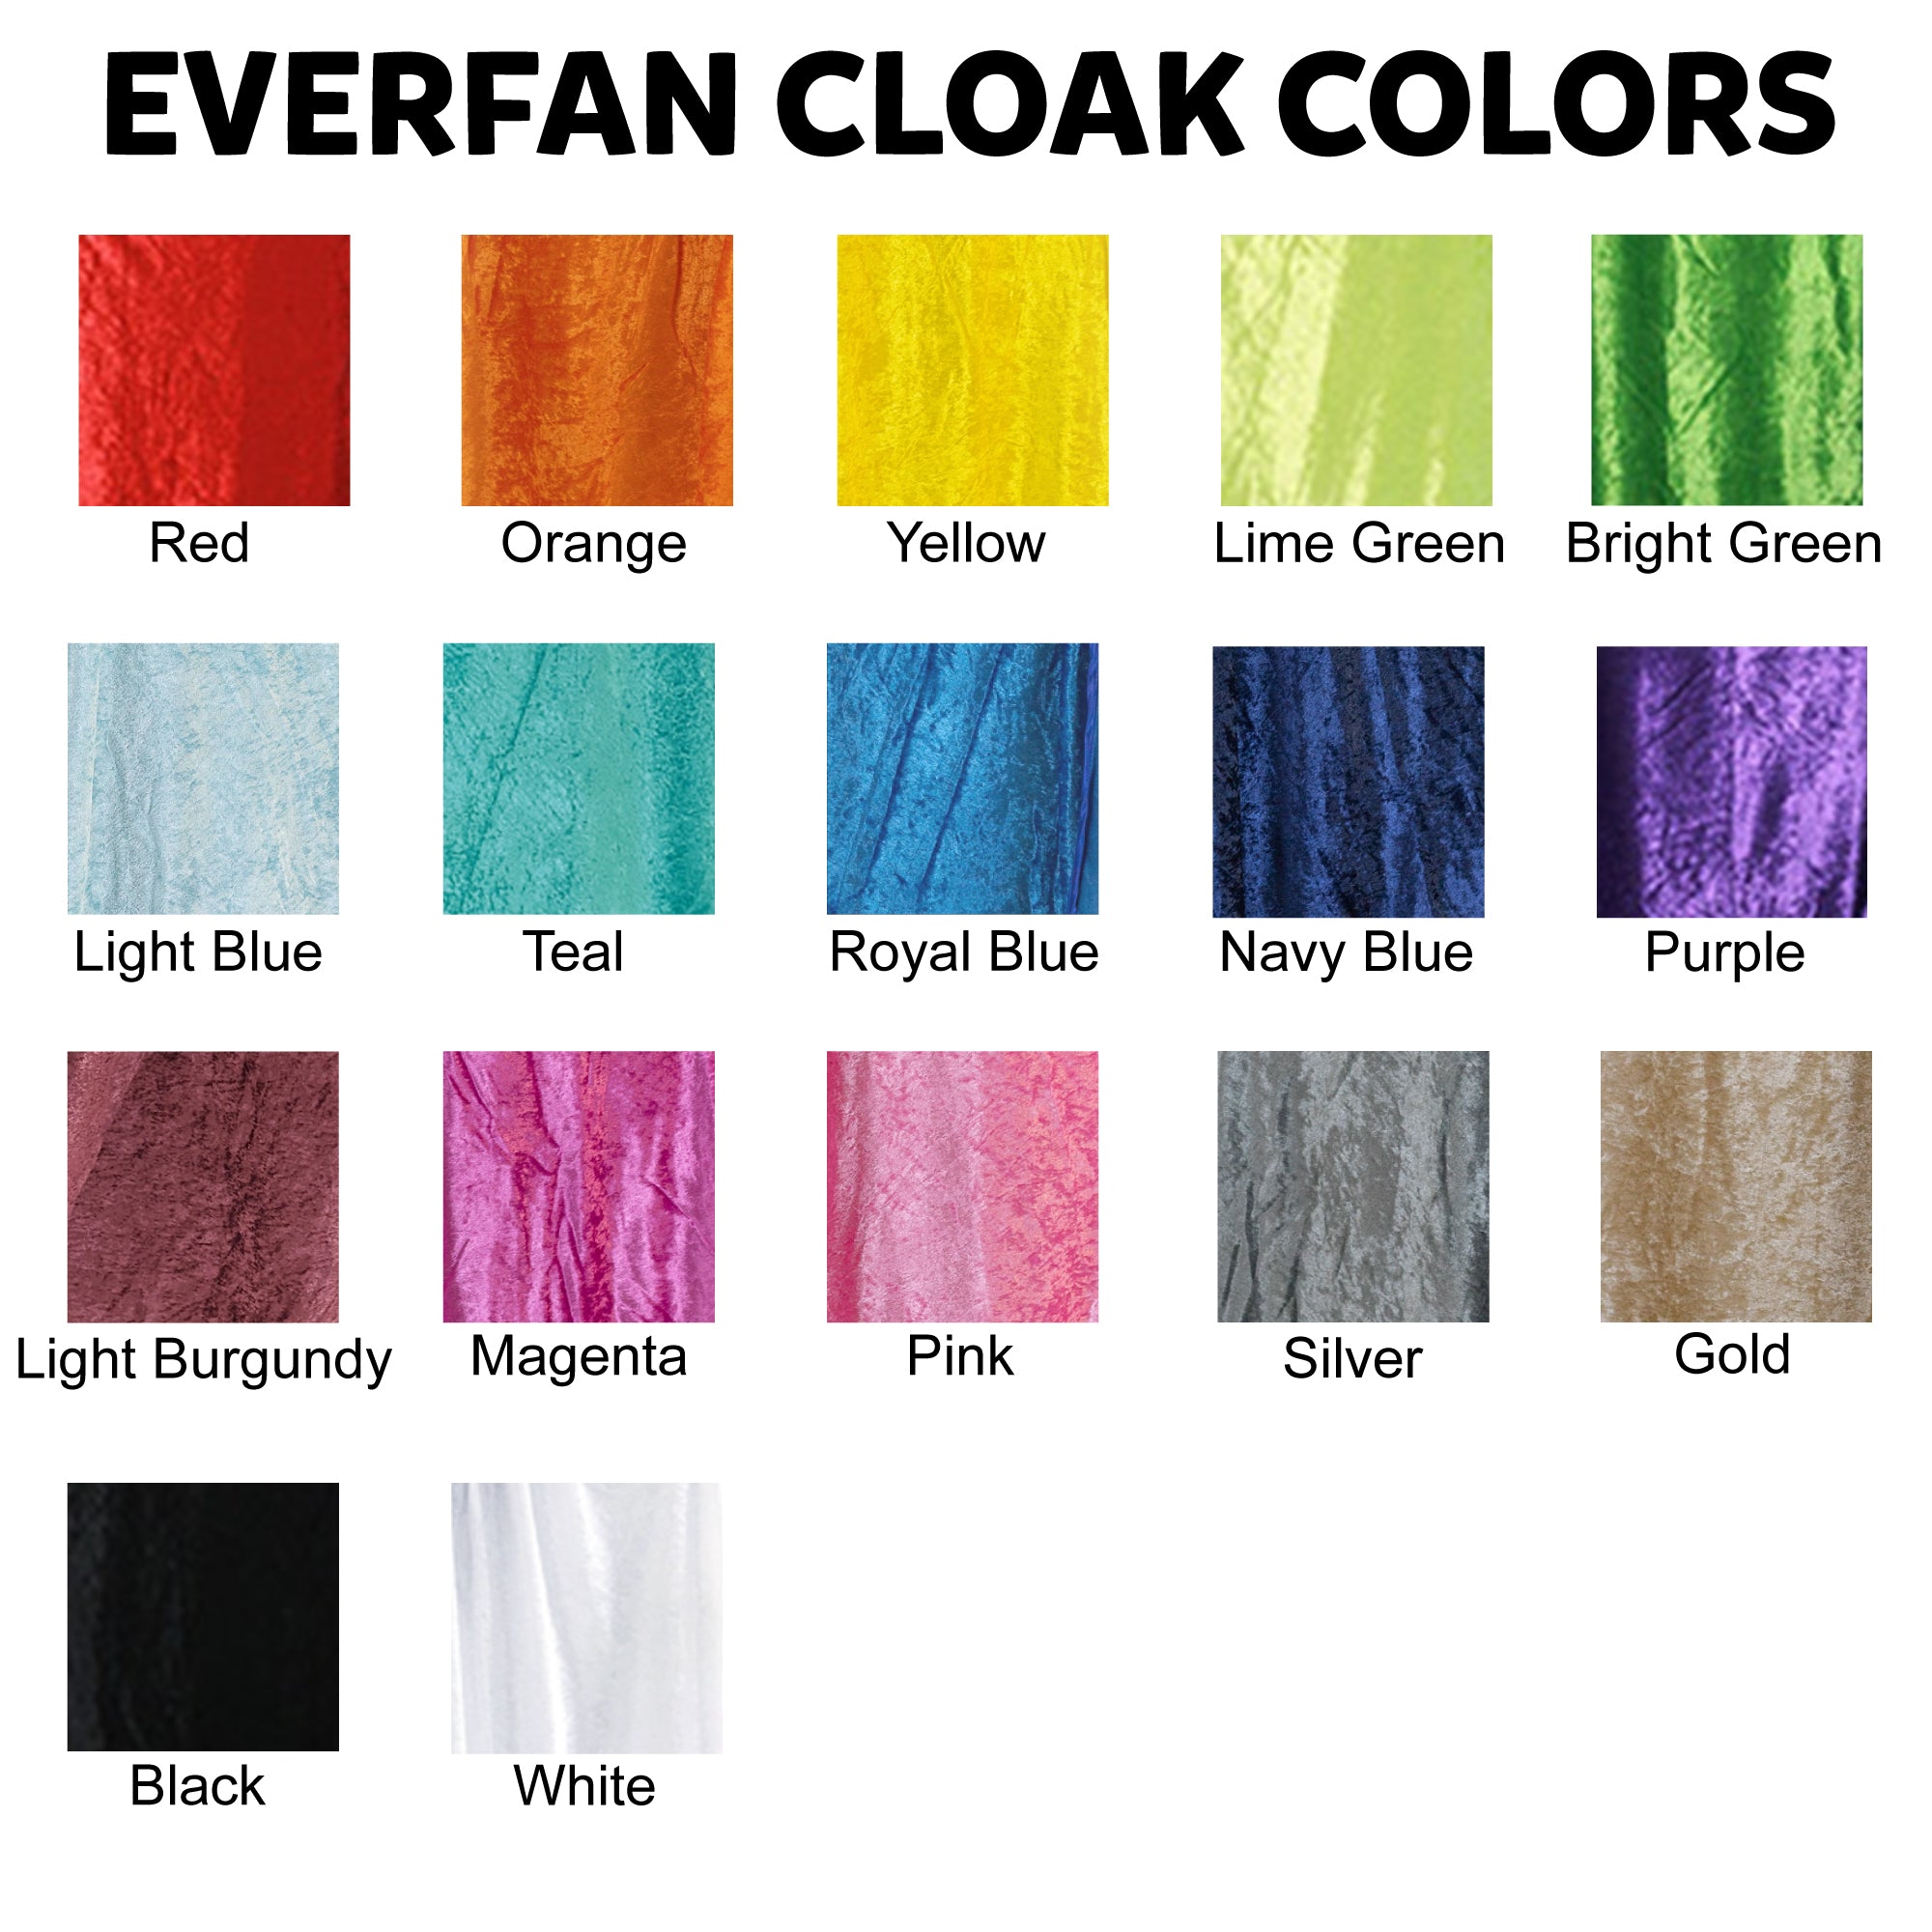 Everfan Medieval Cloak with Fur Mantle Small (Kids - 30 Long) / Optional Double-Sided / Inside Cloak Layer